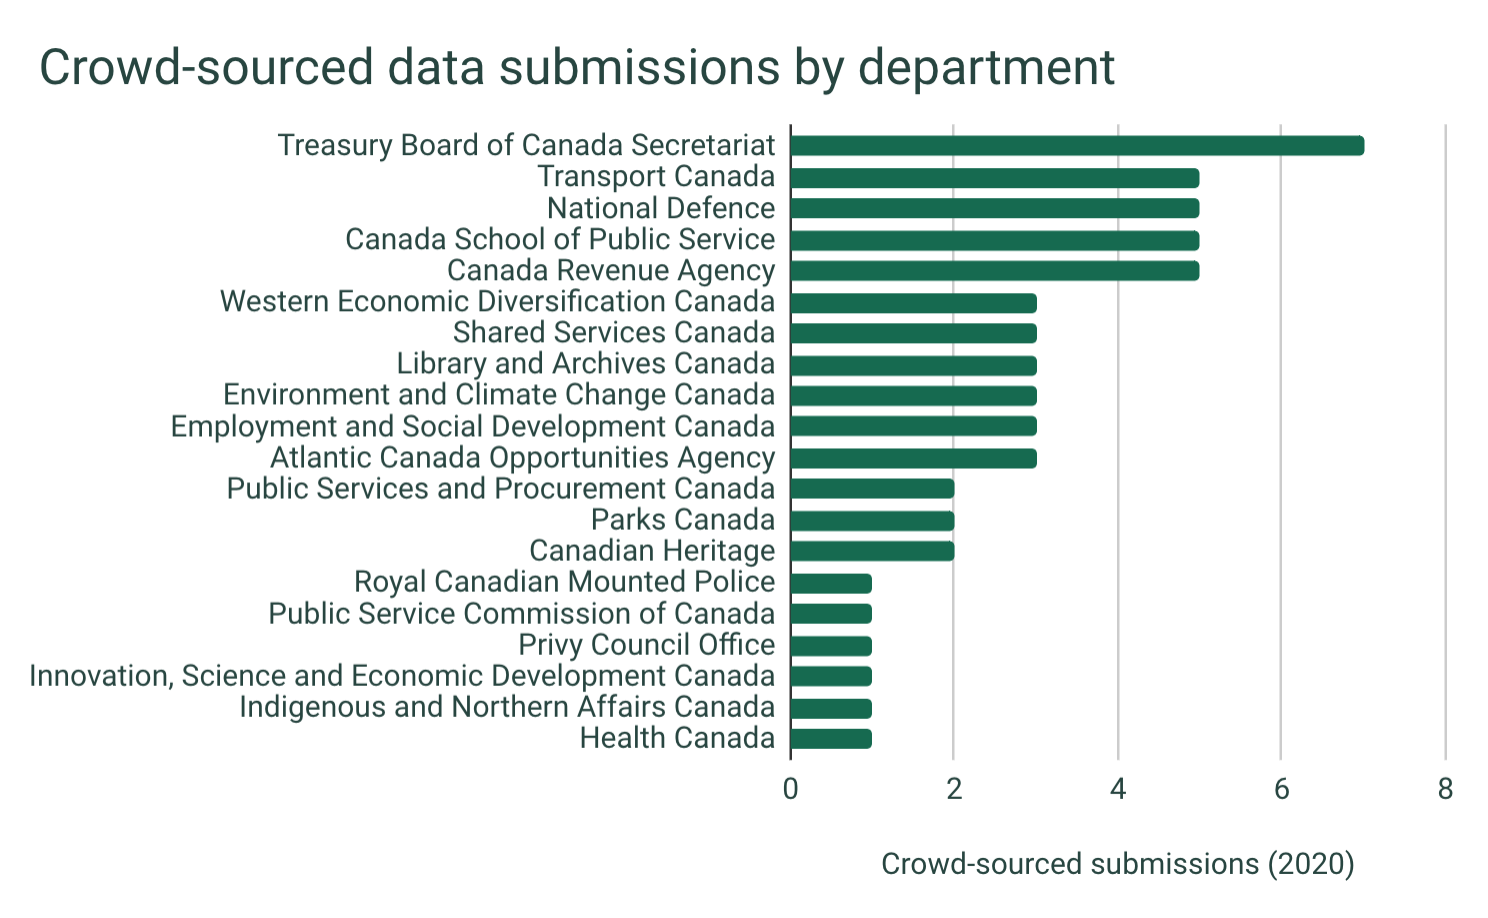 A horizontal bar chart of crowd-sourced data submissions by department; the Treasury Board Secretariat is highest at 7, followed by Transport Canada, National Defence, the Canada School of Public Service, and Canada Revenue Agency all at 5 each. The other departments have less than 5 entries each.